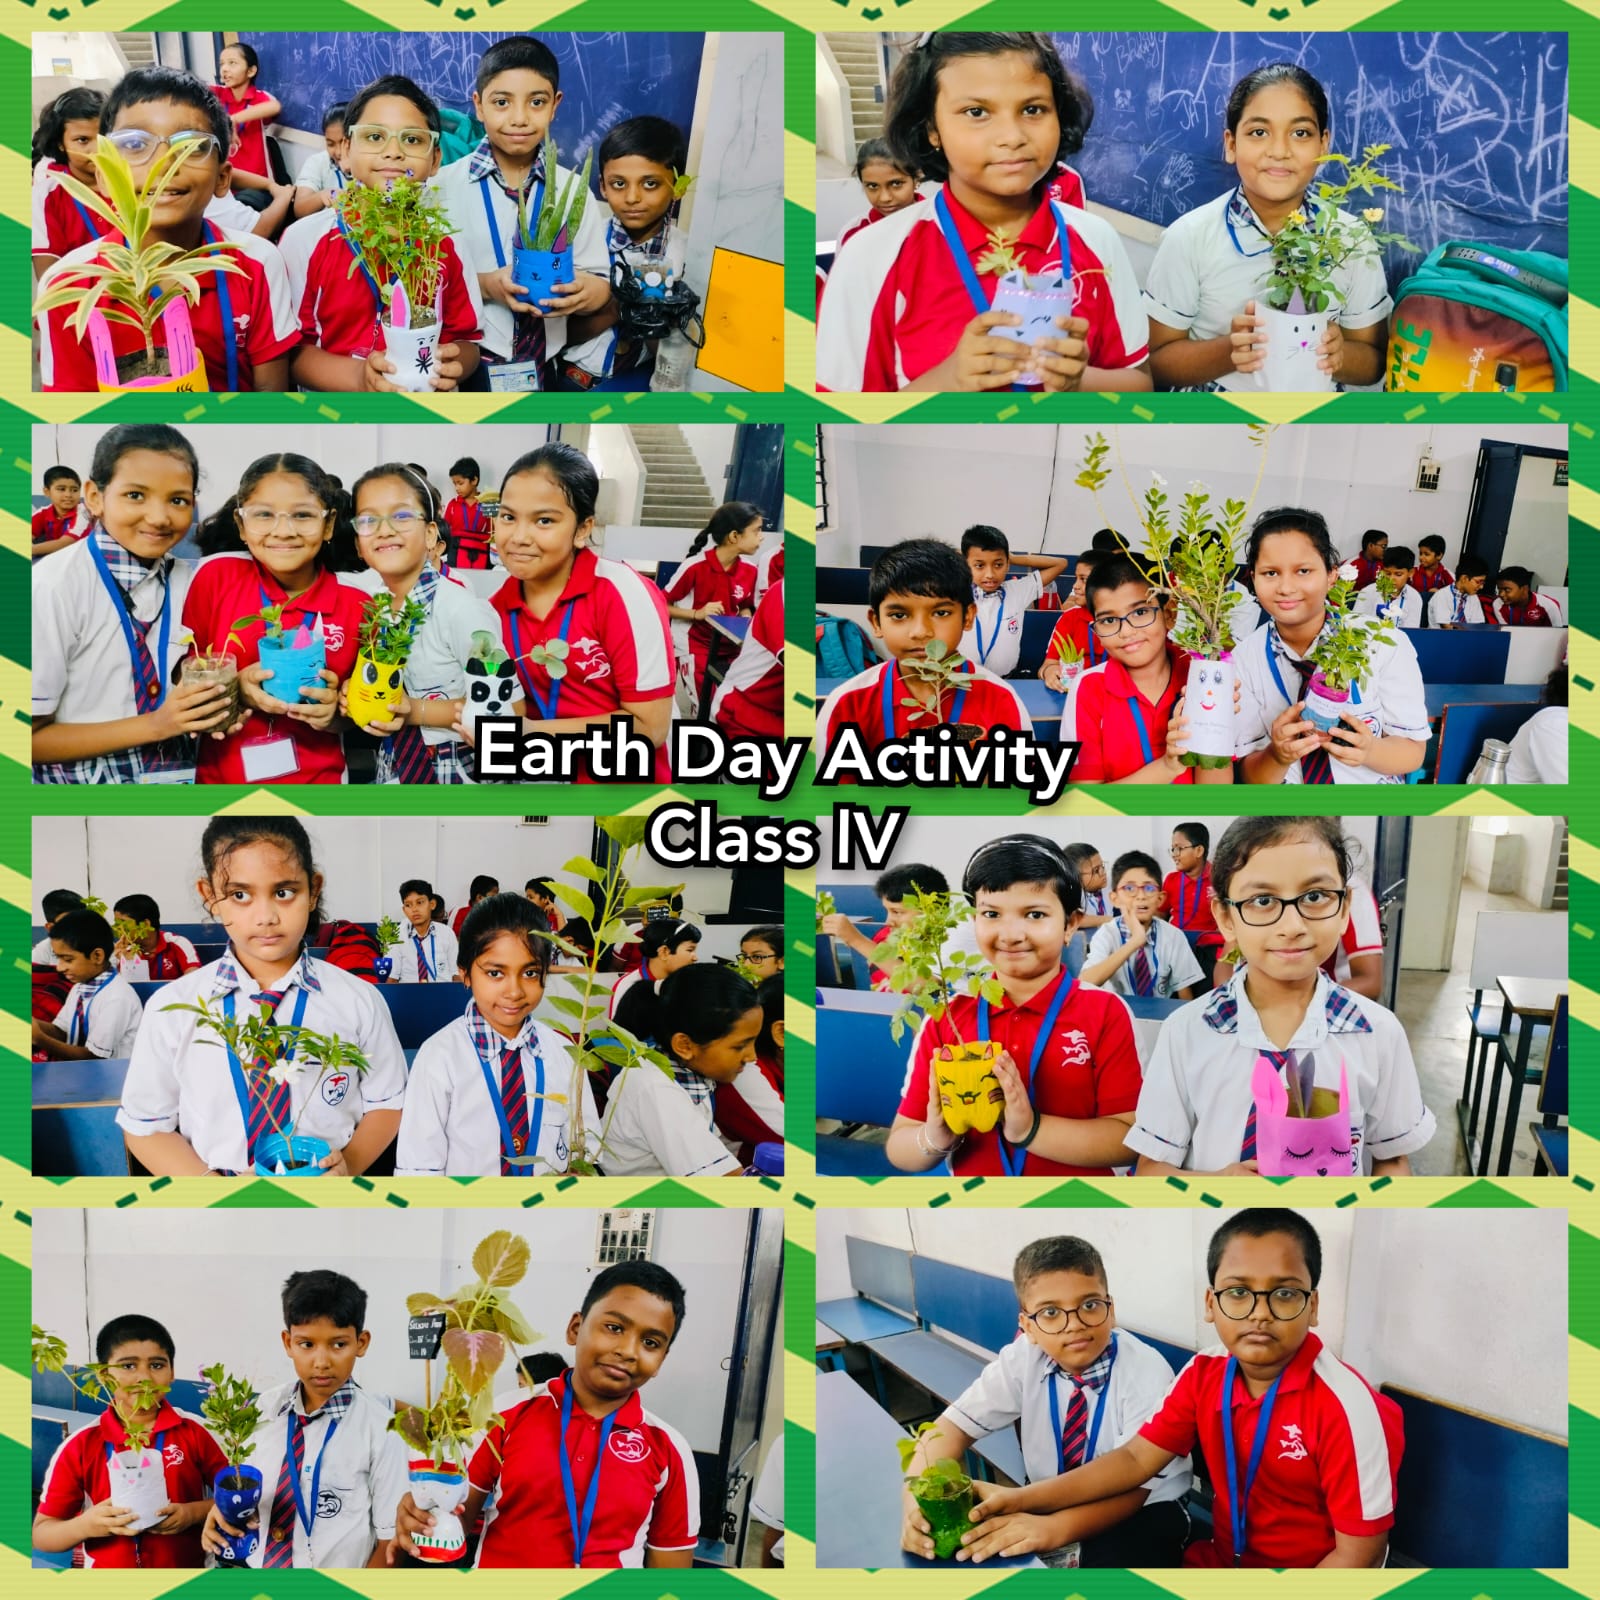 Earth Day celebration with great enthusiasm